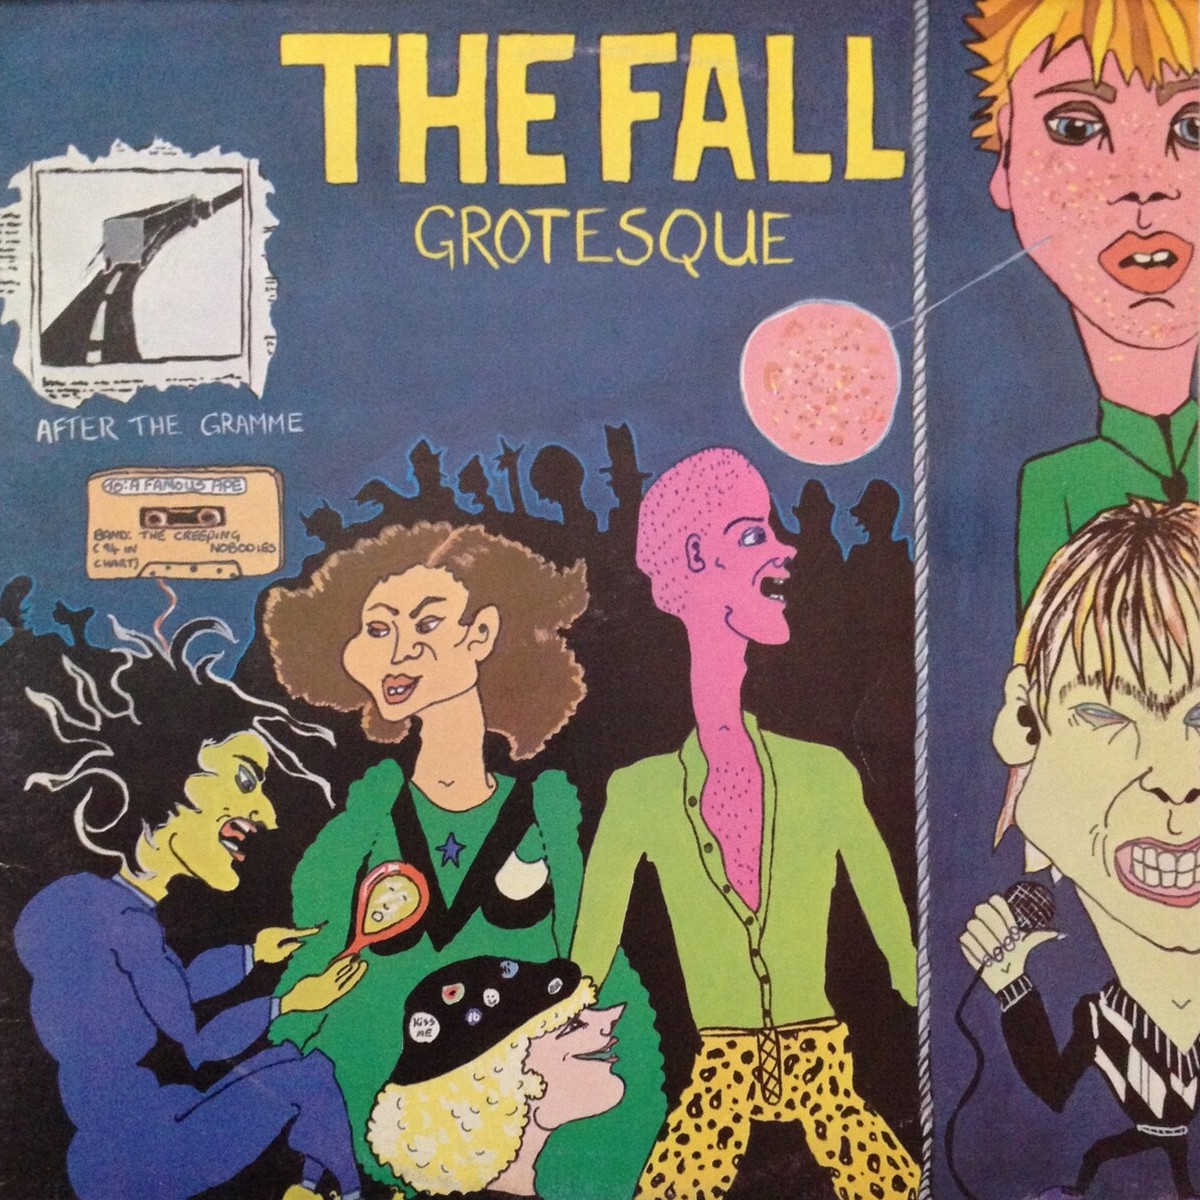 Read more about the article Godišnjica objavljivanja albuma Grotesque (After the Gramme) post-punk benda The Fall